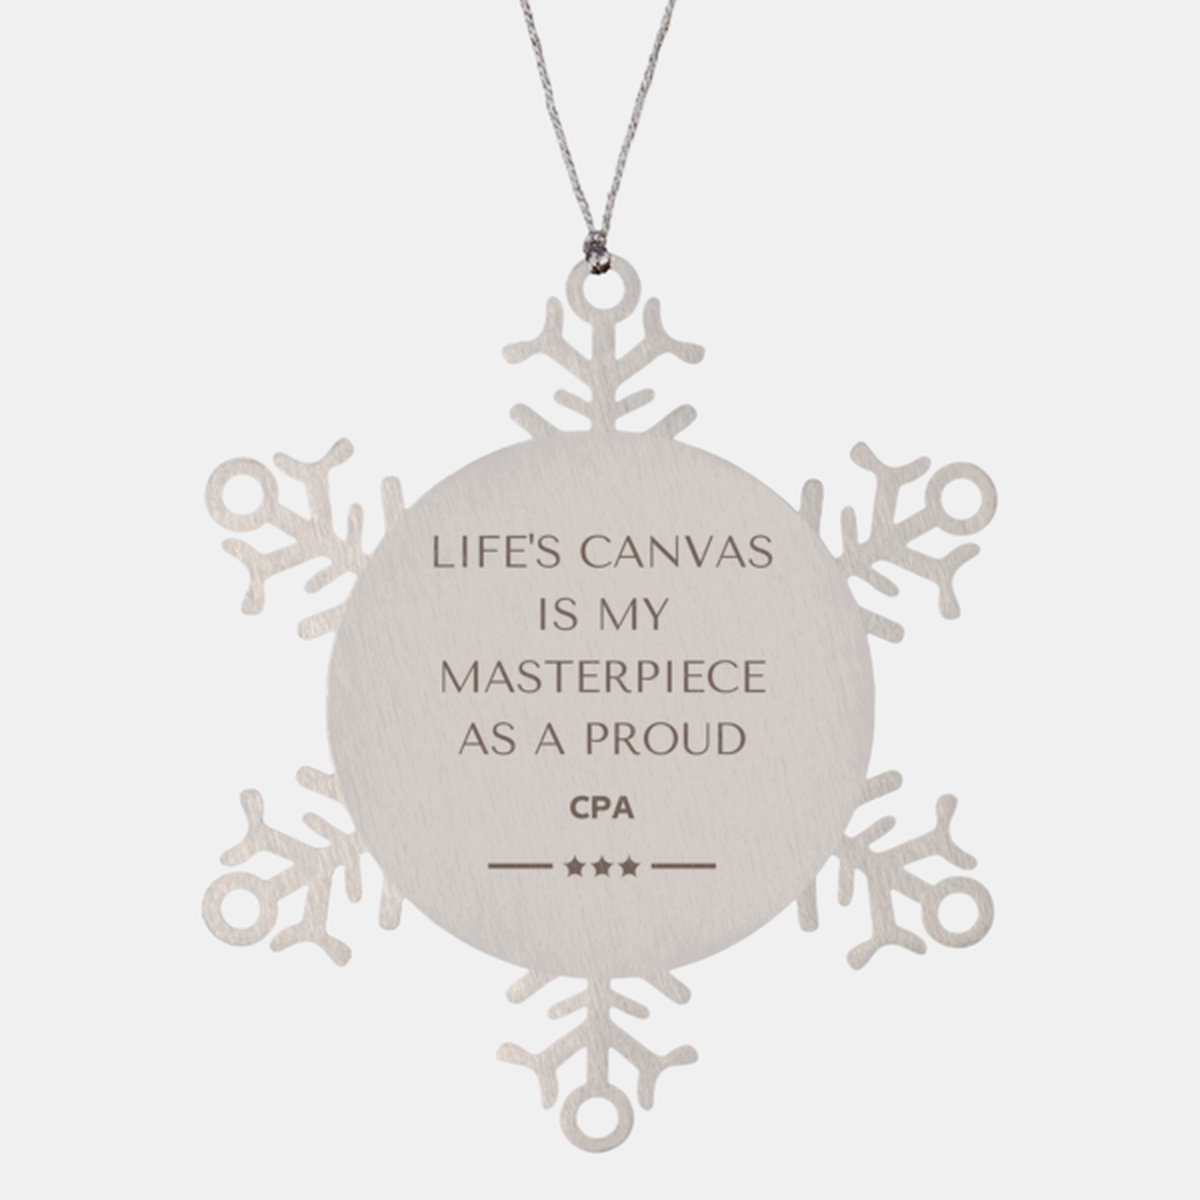 Proud CPA Gifts, Life's canvas is my masterpiece, Epic Birthday Christmas Unique Snowflake Ornament For CPA, Coworkers, Men, Women, Friends